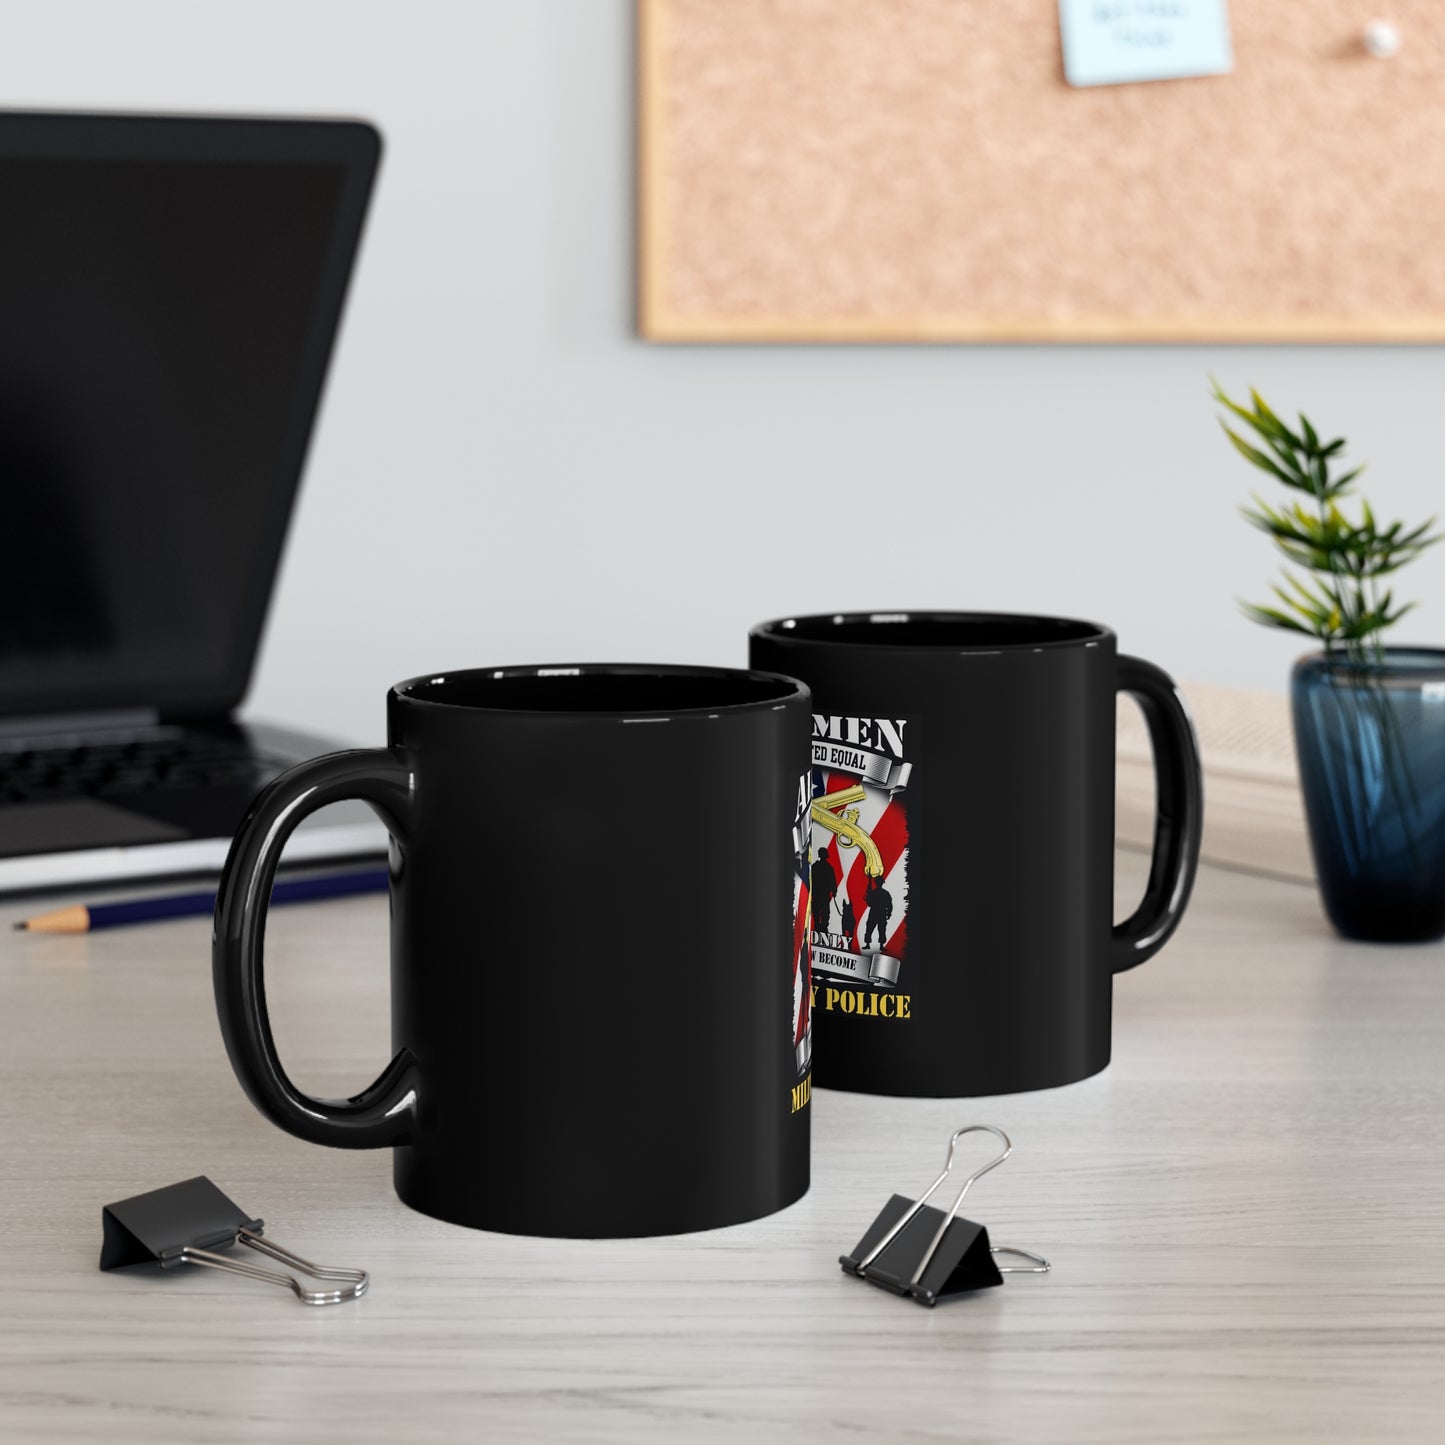 All Men Are Created Equal Only Few Become Military Police 11oz Black Mug